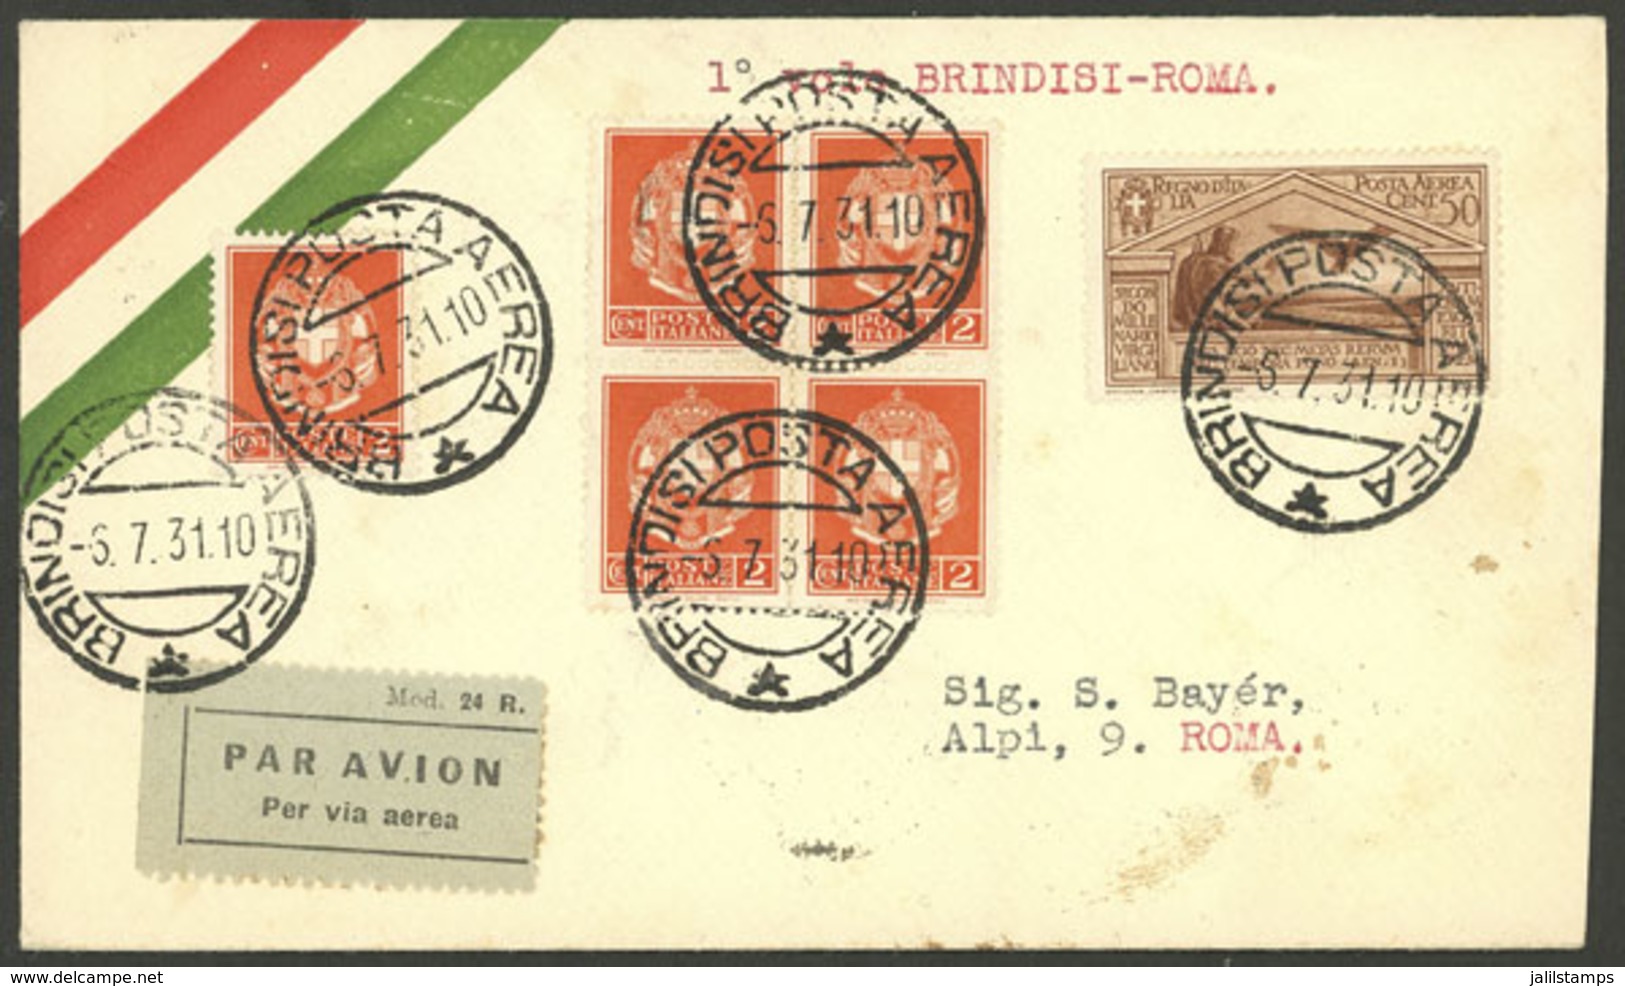 ITALY: 6/JUL/1931 Brindisi - Roma, First Flight, Cover Of VF Quality With Arrival Backstamp - Sin Clasificación